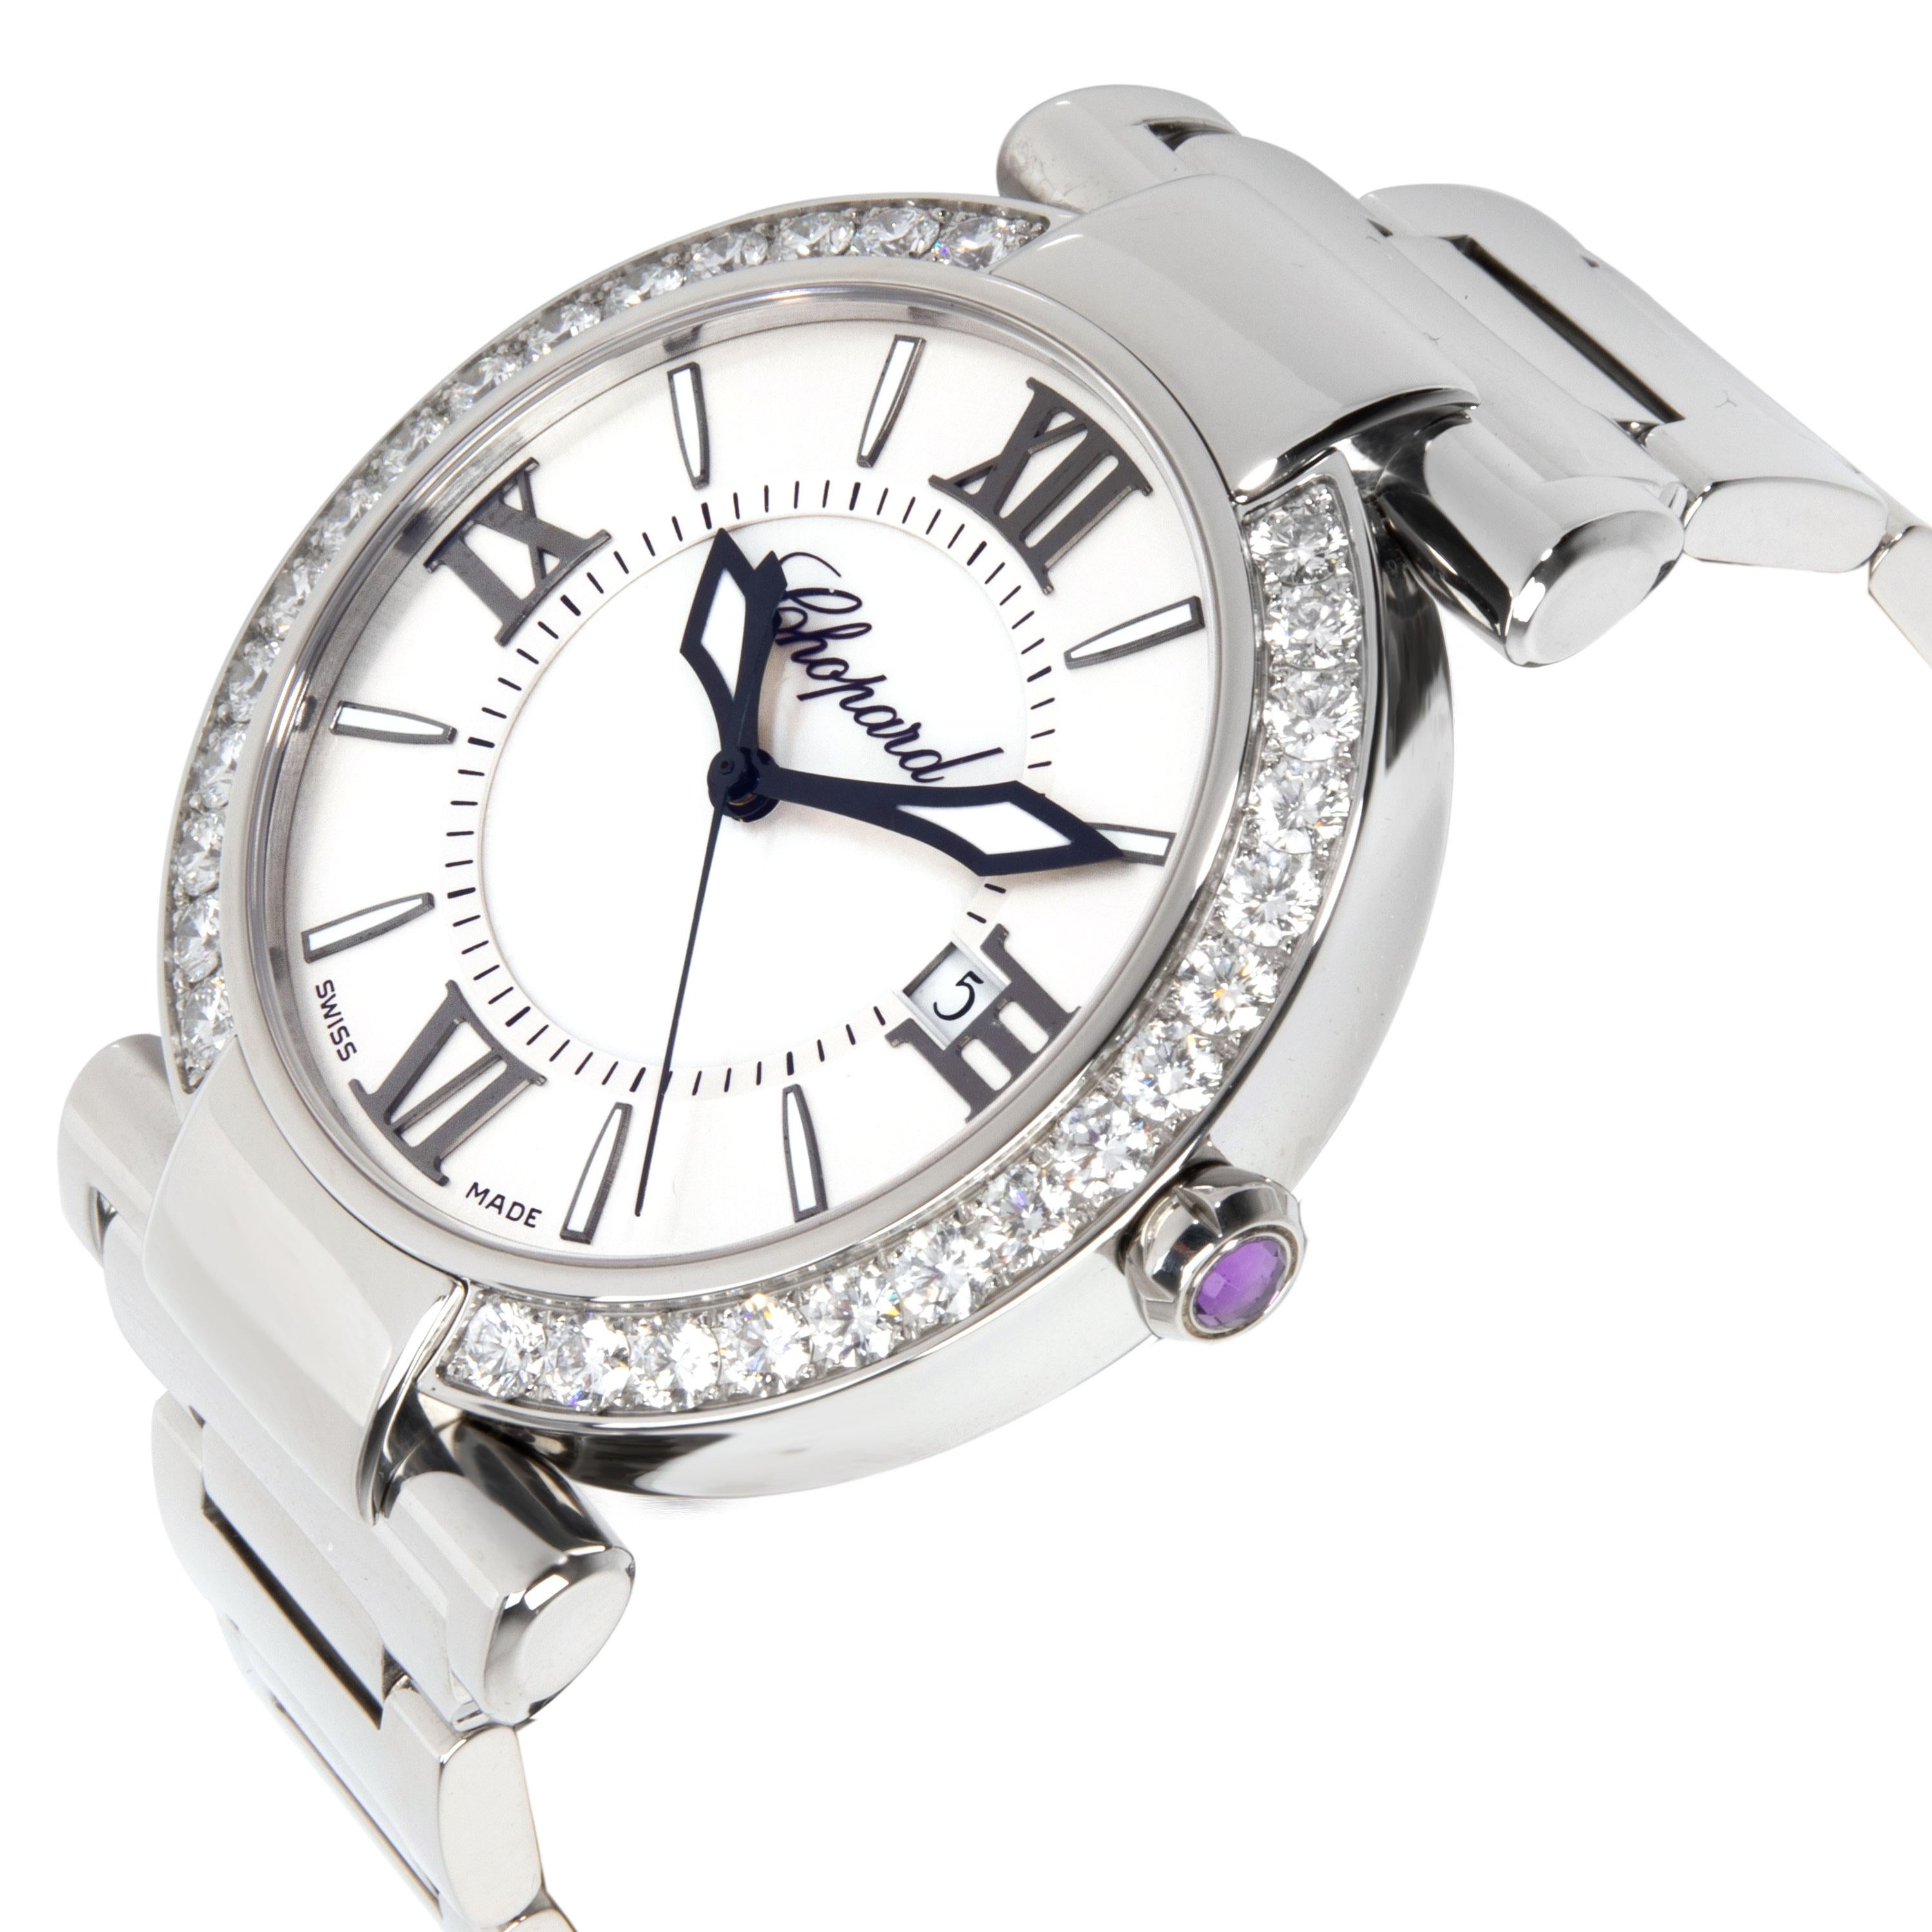 
Chopard Imperiale 388531-3004 Unisex Watch in Stainless Steel

SKU: 102314

PRIMARY DETAILS
Brand:  Chopard
Model: Imperiale
Serial Number: ***
Country of Origin: Switzerland
Movement Type: Mechanical: Automatic/Kinetic
Refurbished Notes: Overhaul,